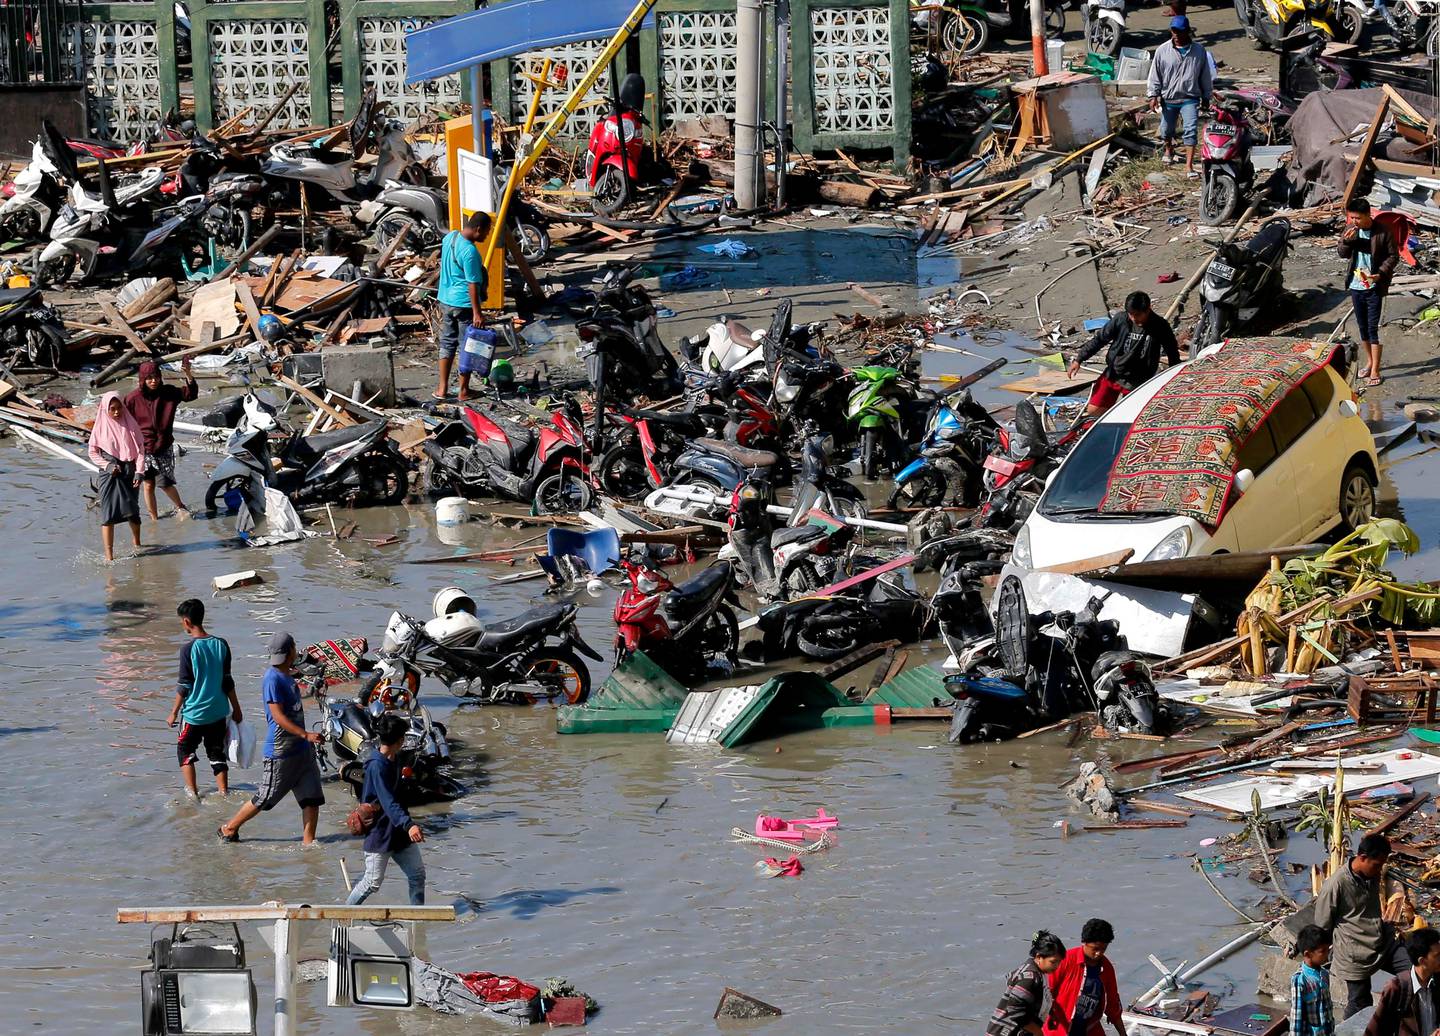 People survey damage outside the shopping mall following earthquakes and tsunami in Palu, Central Sulawesi, Indonesia, Sunday, Sept. 30, 2018. Rescuers try to reach trapped victims in collapsed buildings after hundreds of people are confirmed dead in a tsunami that hit two central Indonesian cities, sweeping away buildings with massive waves. (AP Photo/Tatan Syuflana)